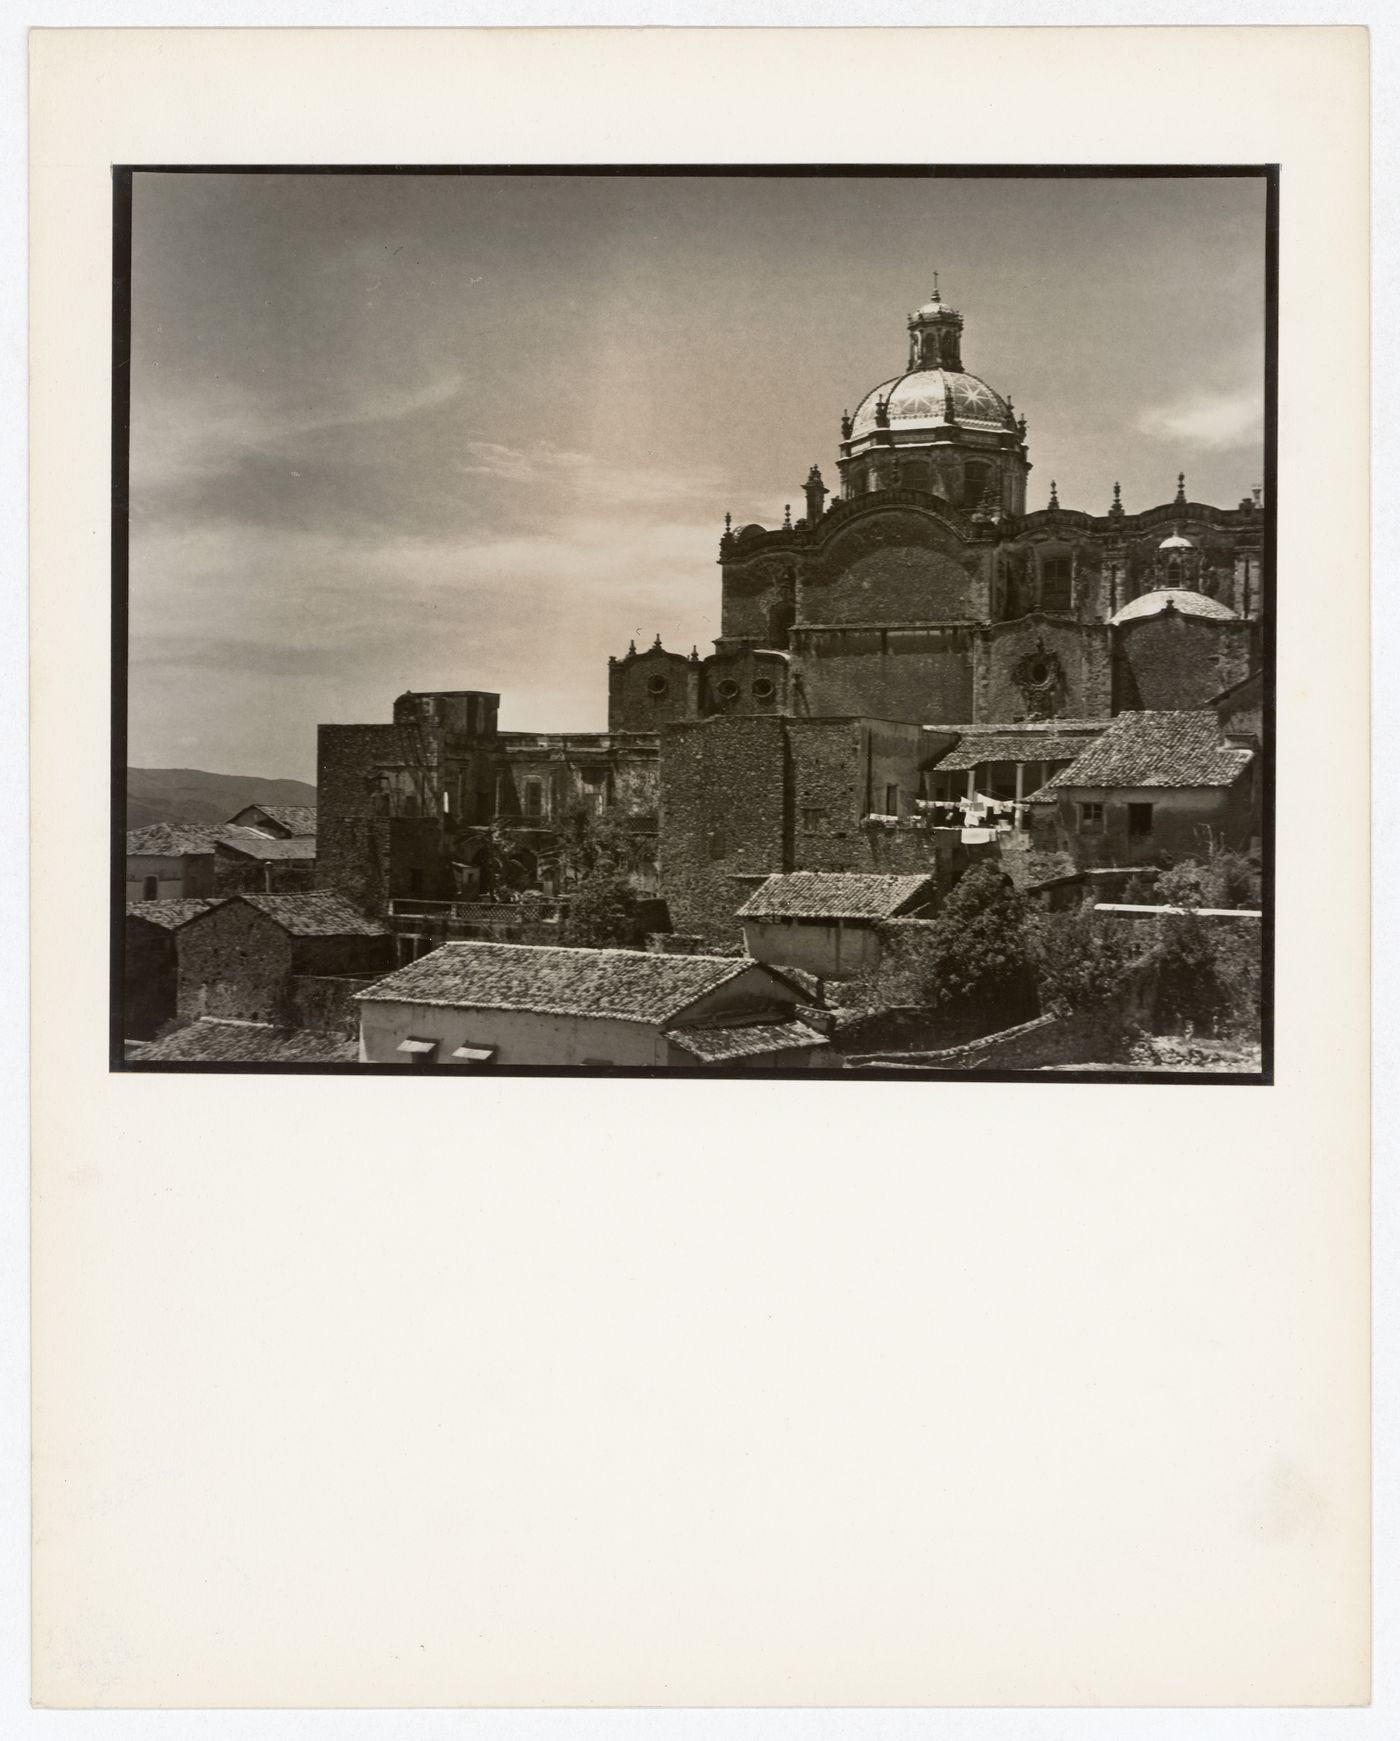 Partial view of Santa Prisca showing the dome with houses in the foreground, Taxco de Alarcón, Mexico